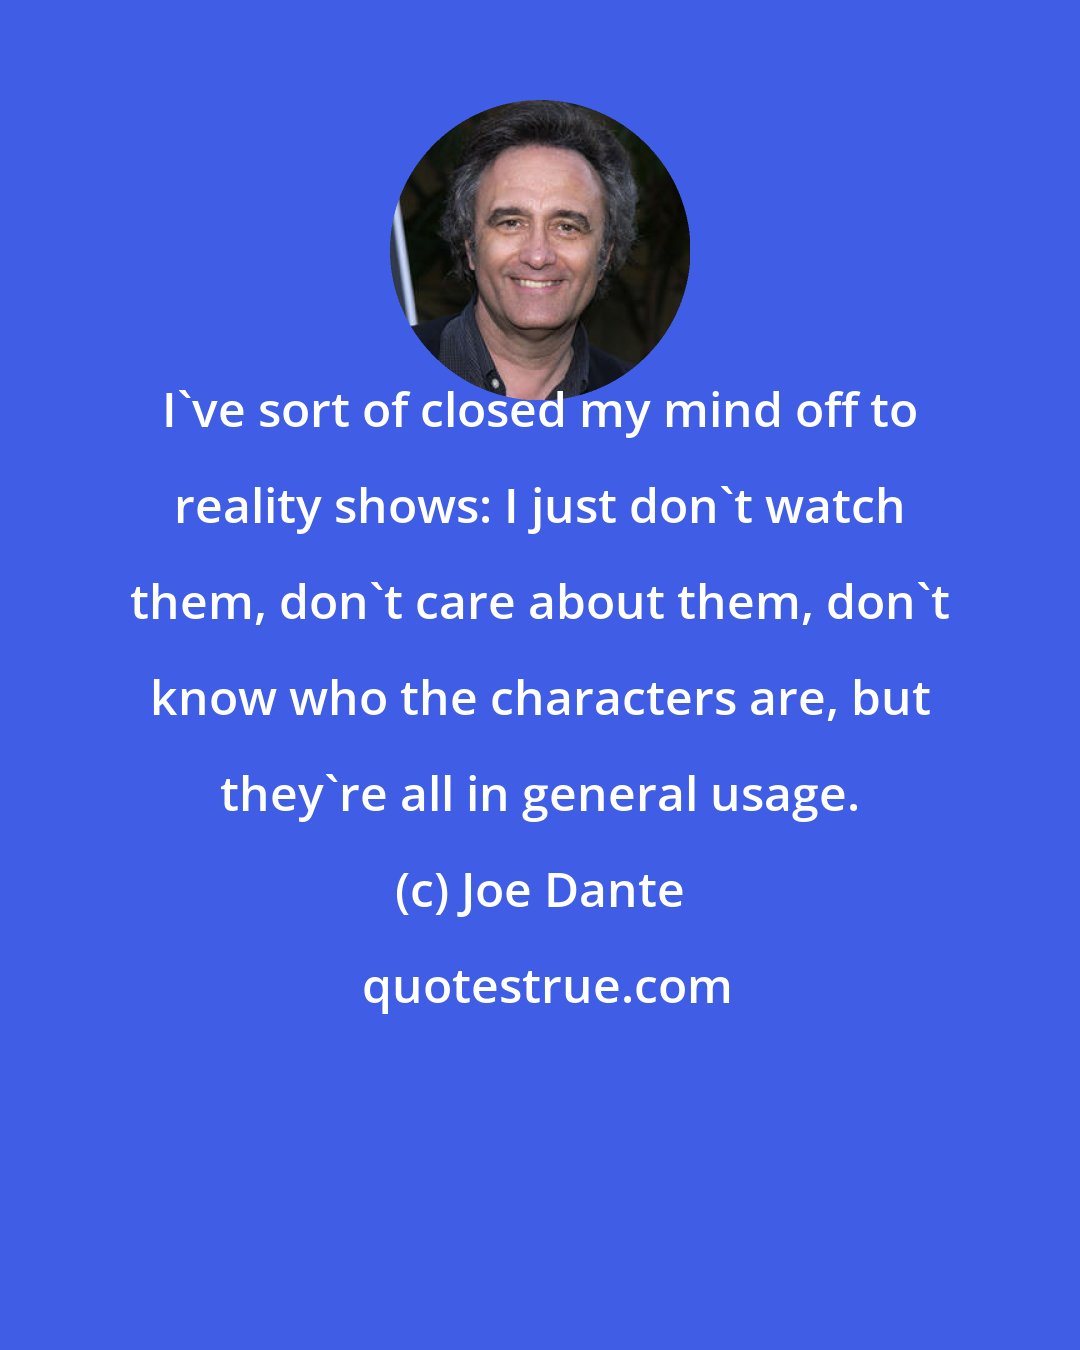 Joe Dante: I've sort of closed my mind off to reality shows: I just don't watch them, don't care about them, don't know who the characters are, but they're all in general usage.